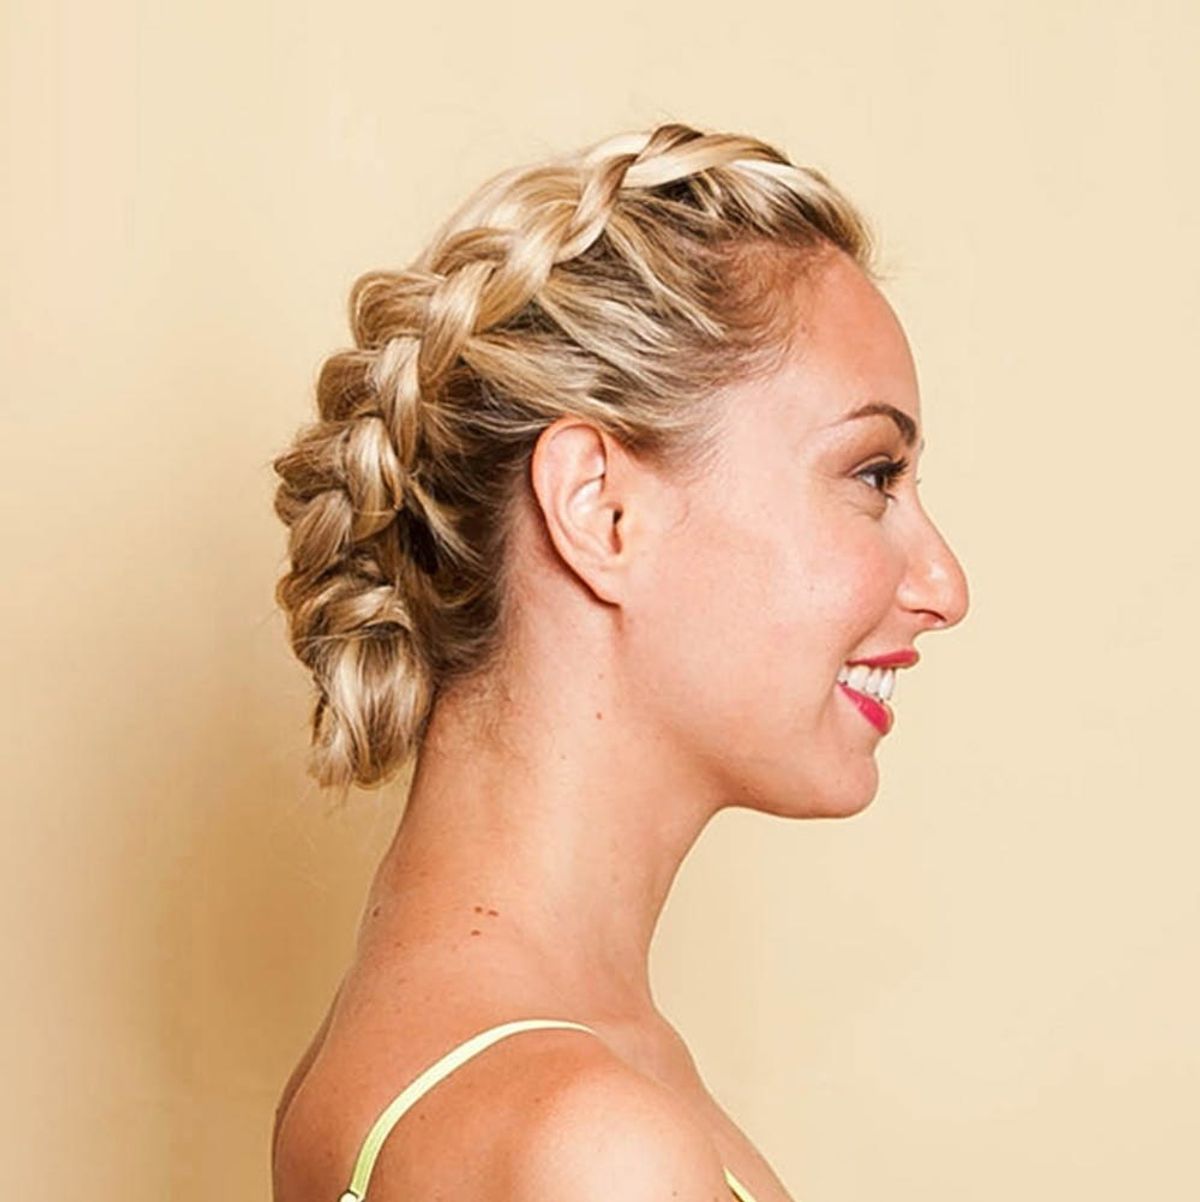 Try This Pinterest Hair Hack for a Dreamy Braid in 10 Minutes